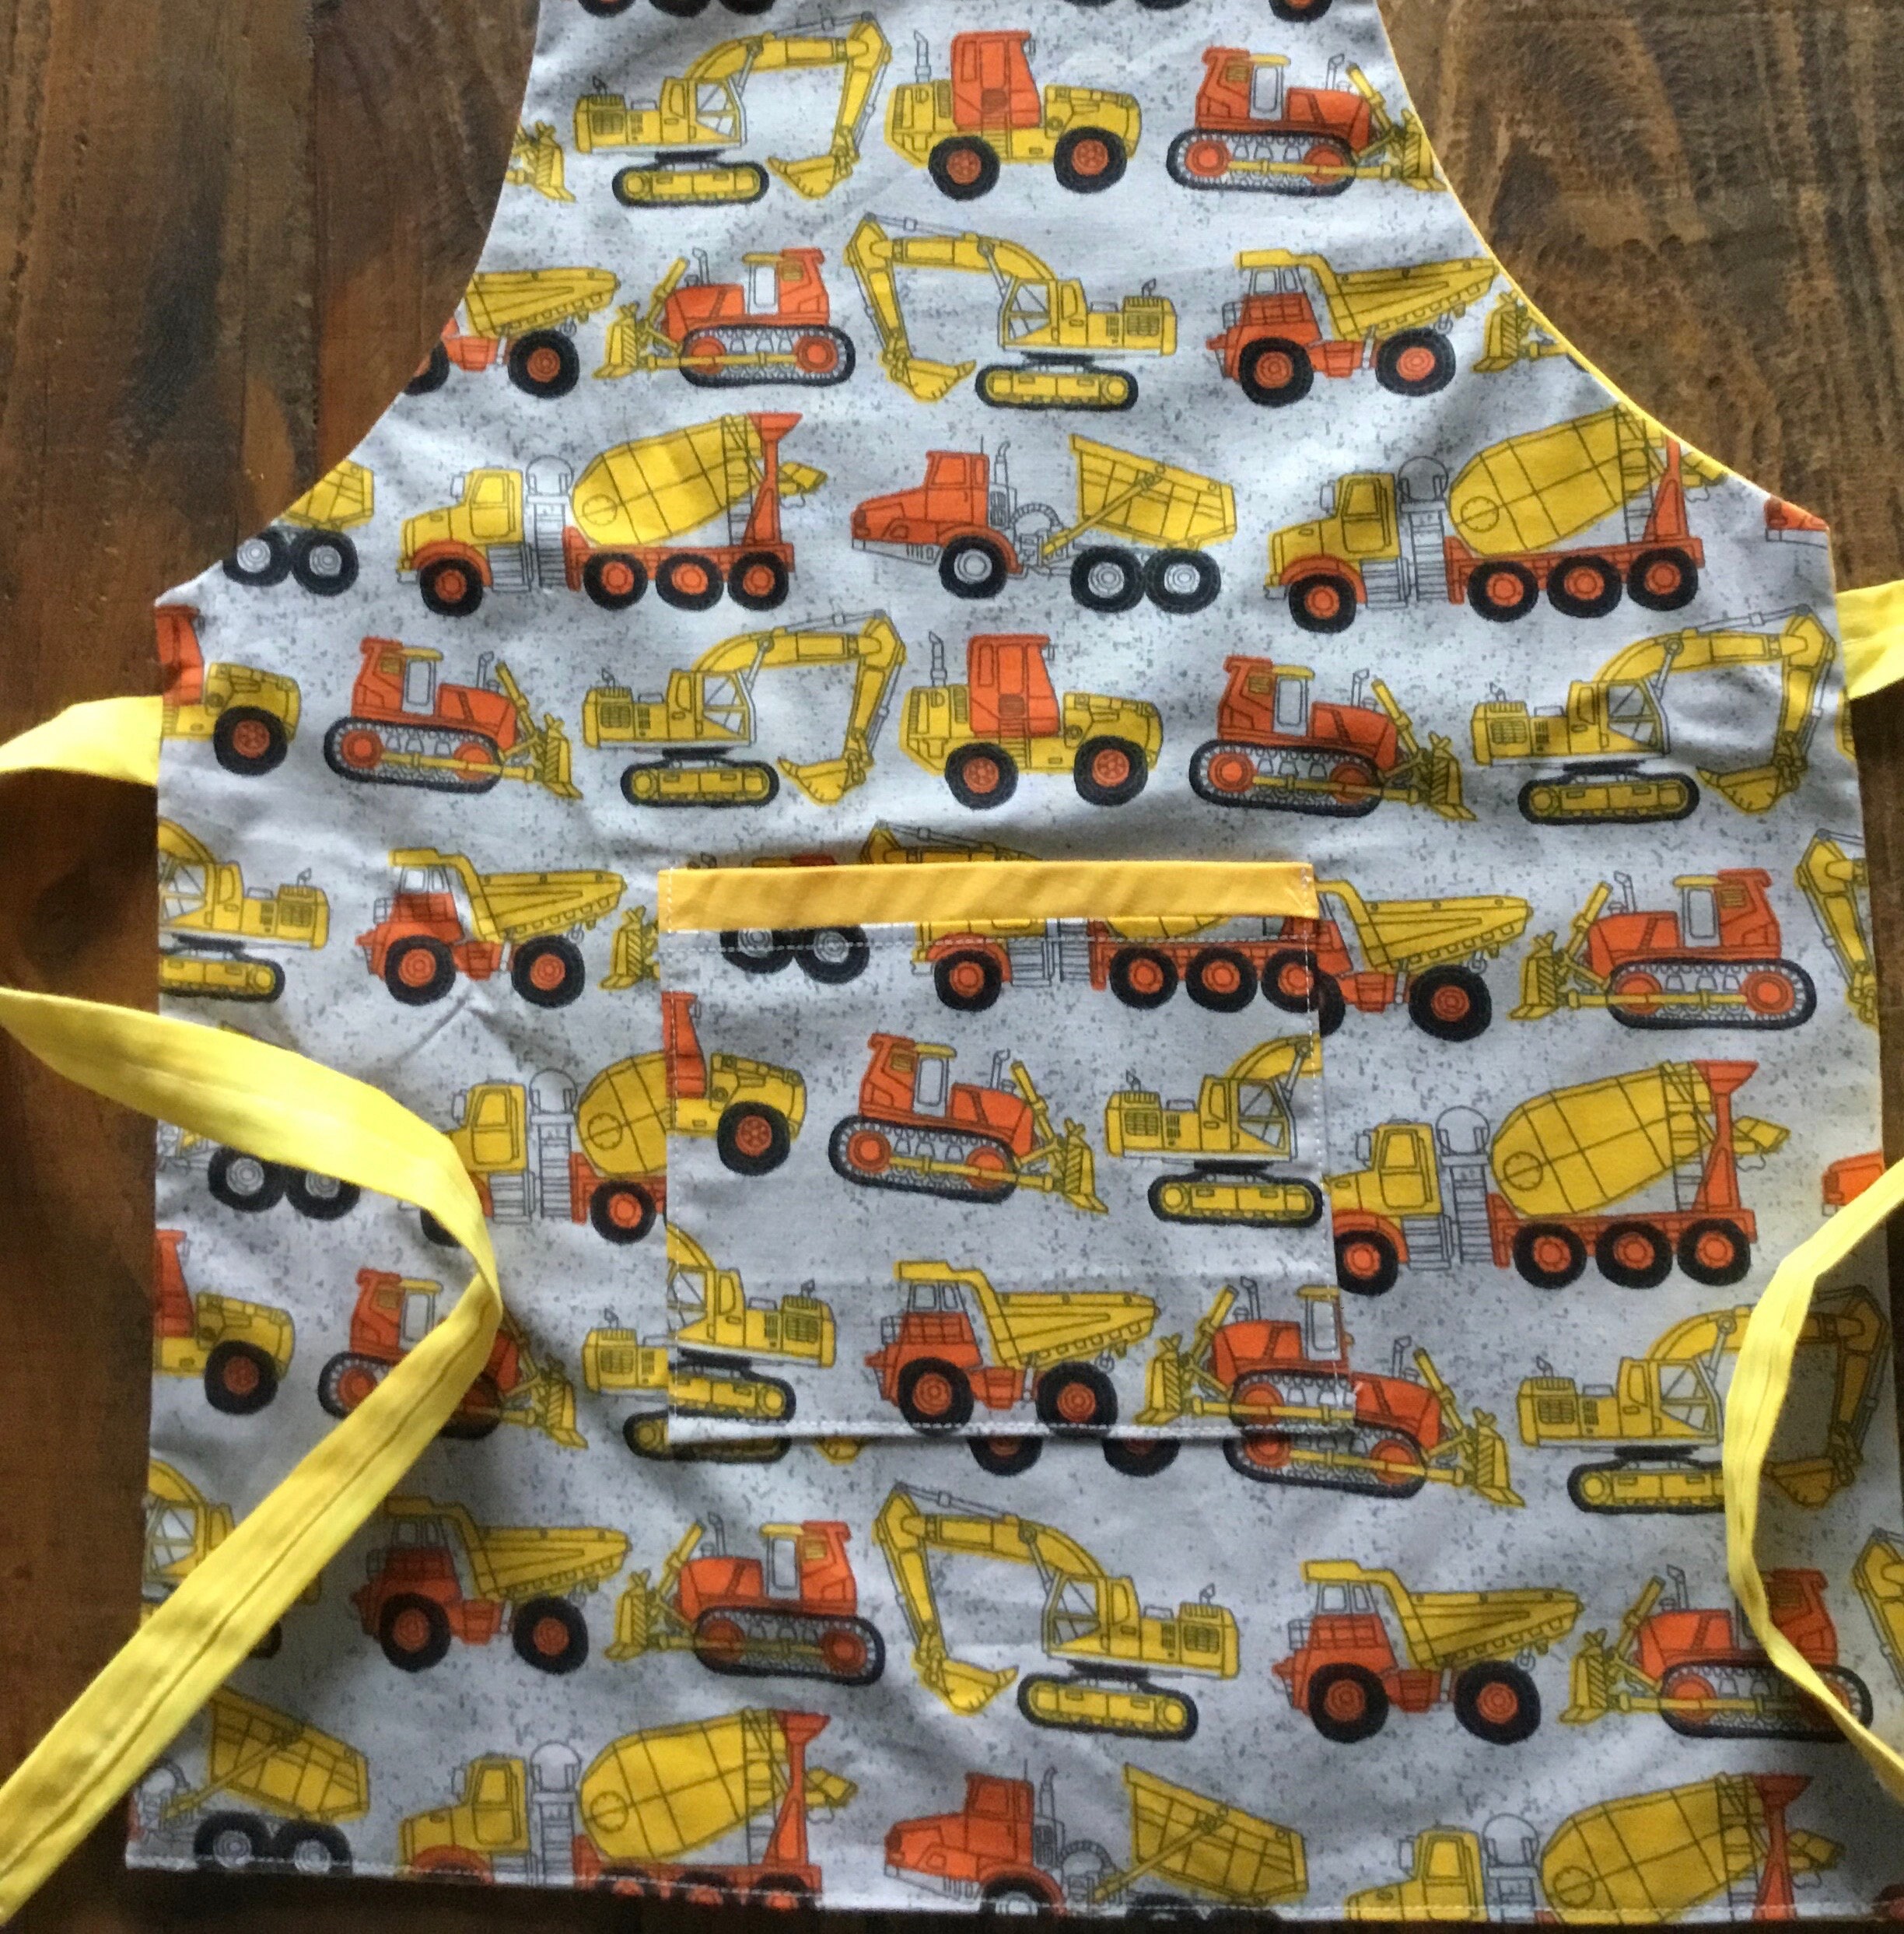 Truck Aprons, Tractors, Little Boy's Apron, Mommy's Helper, Daddy's Helper,  Boy Christmas Gift, Kids' Cooking Aprons, Baking Cookies W/mom 